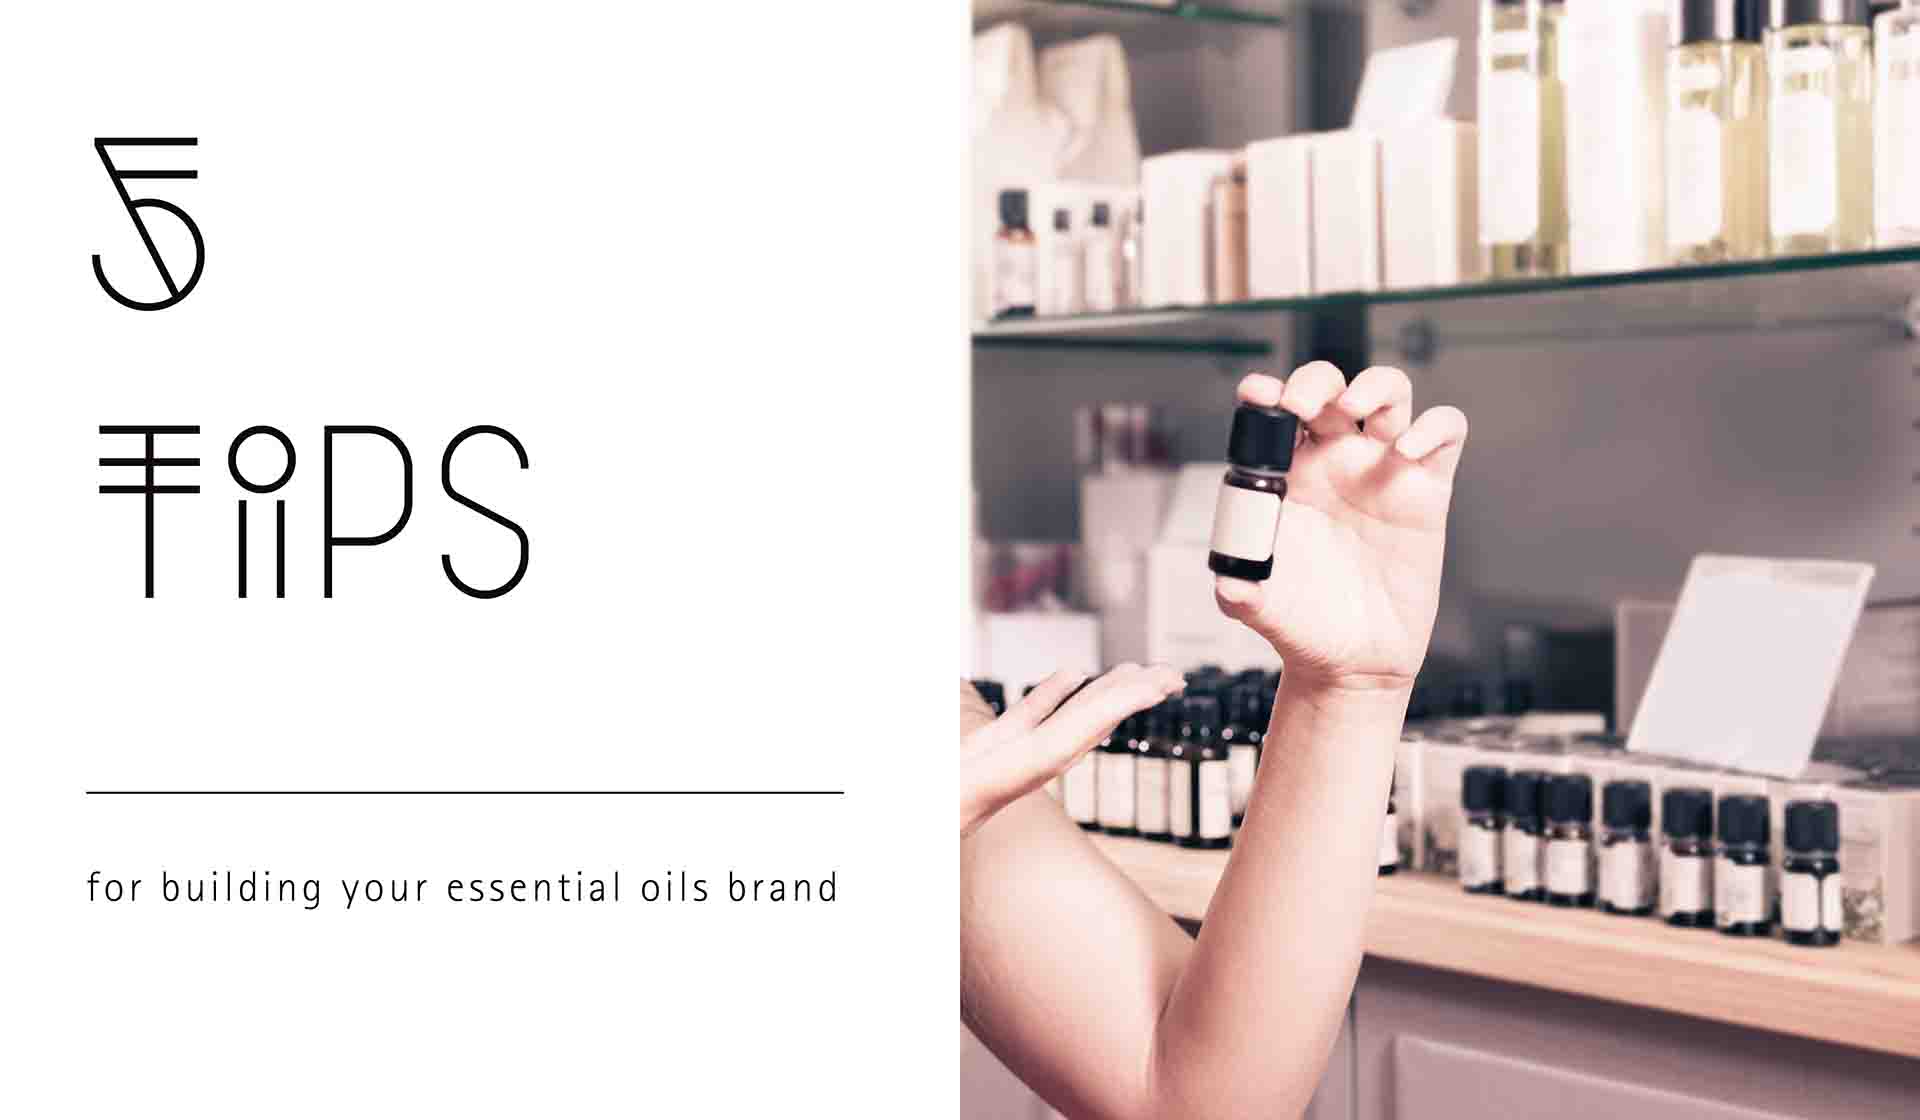 5 Tips for Building Your Essential Oils Brand